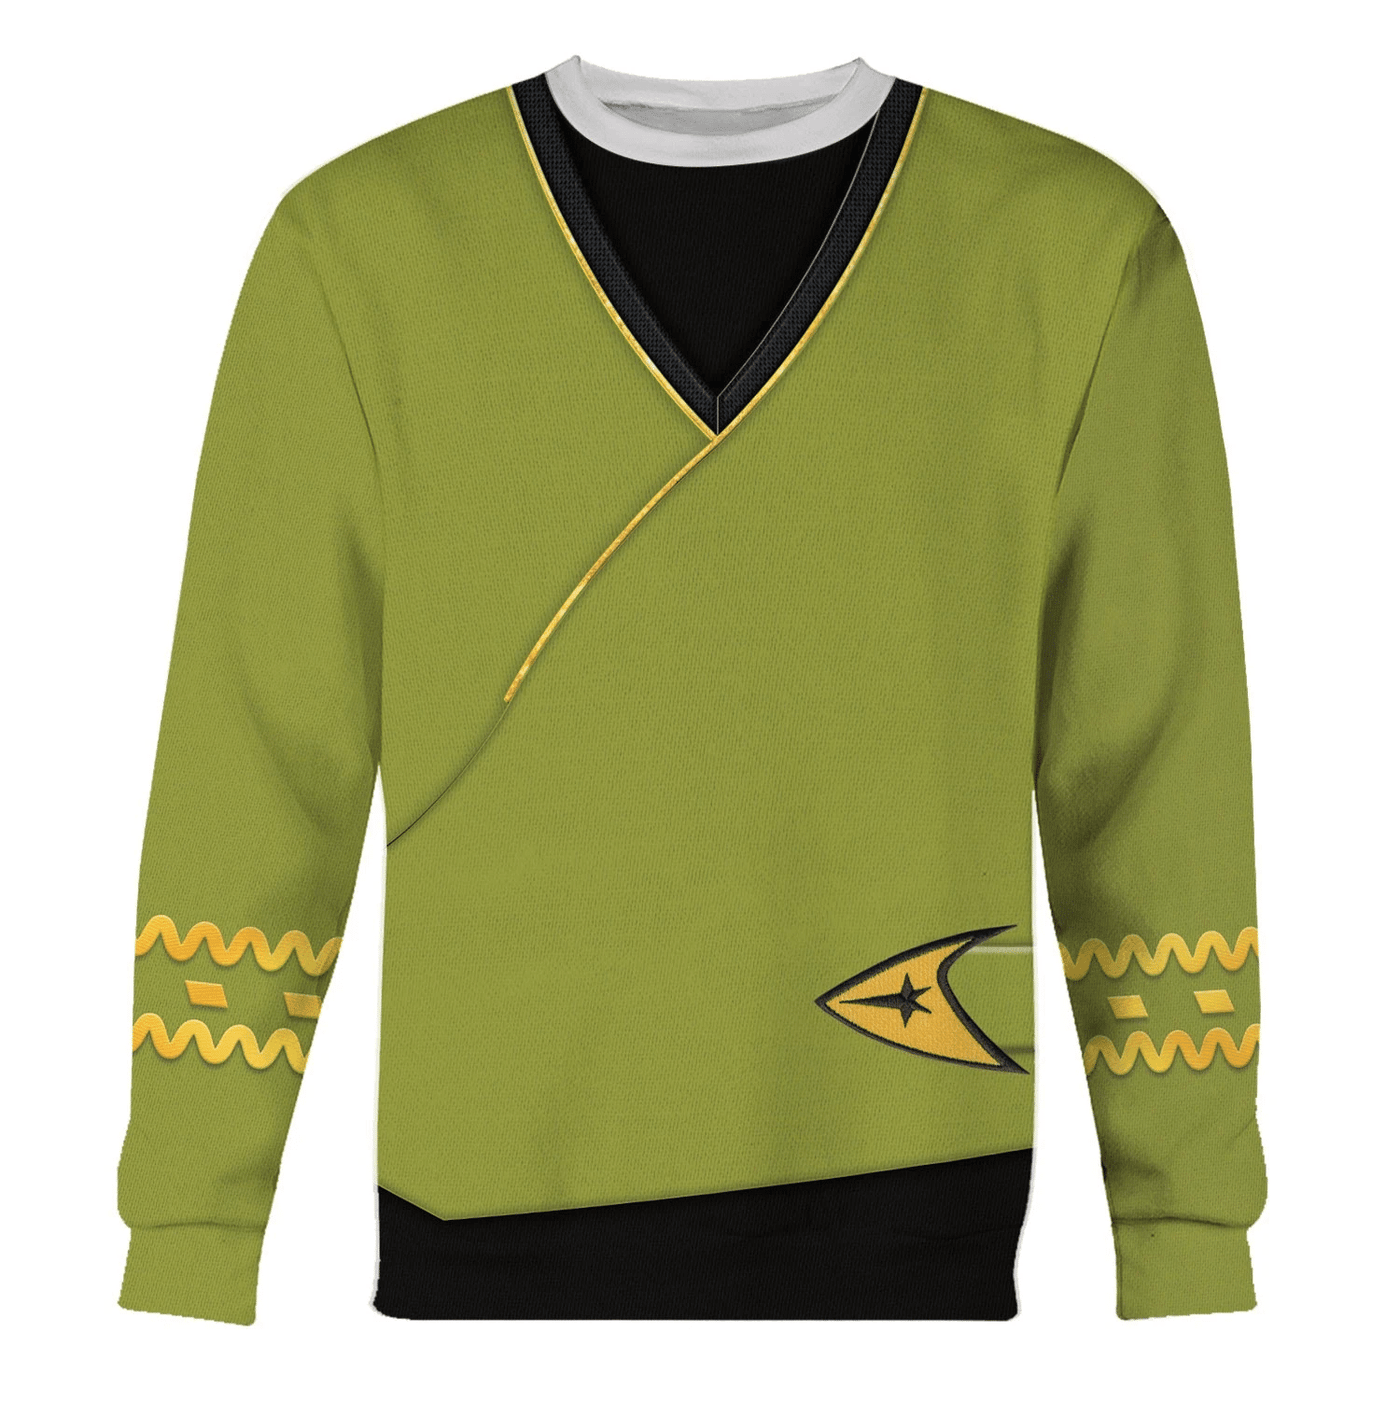 Star Trek TOS Kirk Green Tunic Cool - Sweater - Ugly Christmas Sweater